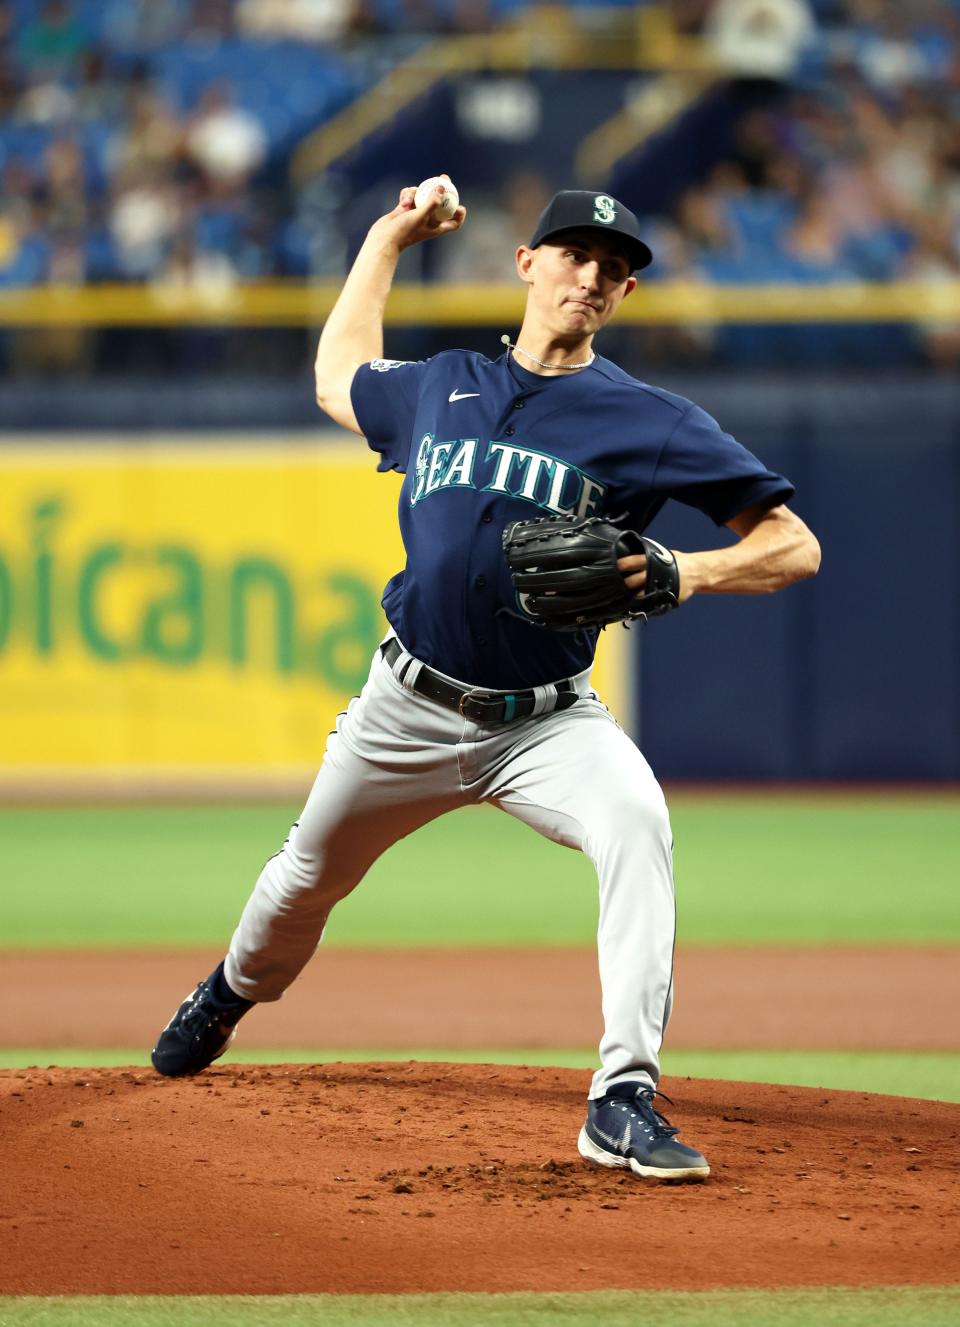 Mariners starting pitcher George Kirby was not happy after his outing on Friday night.